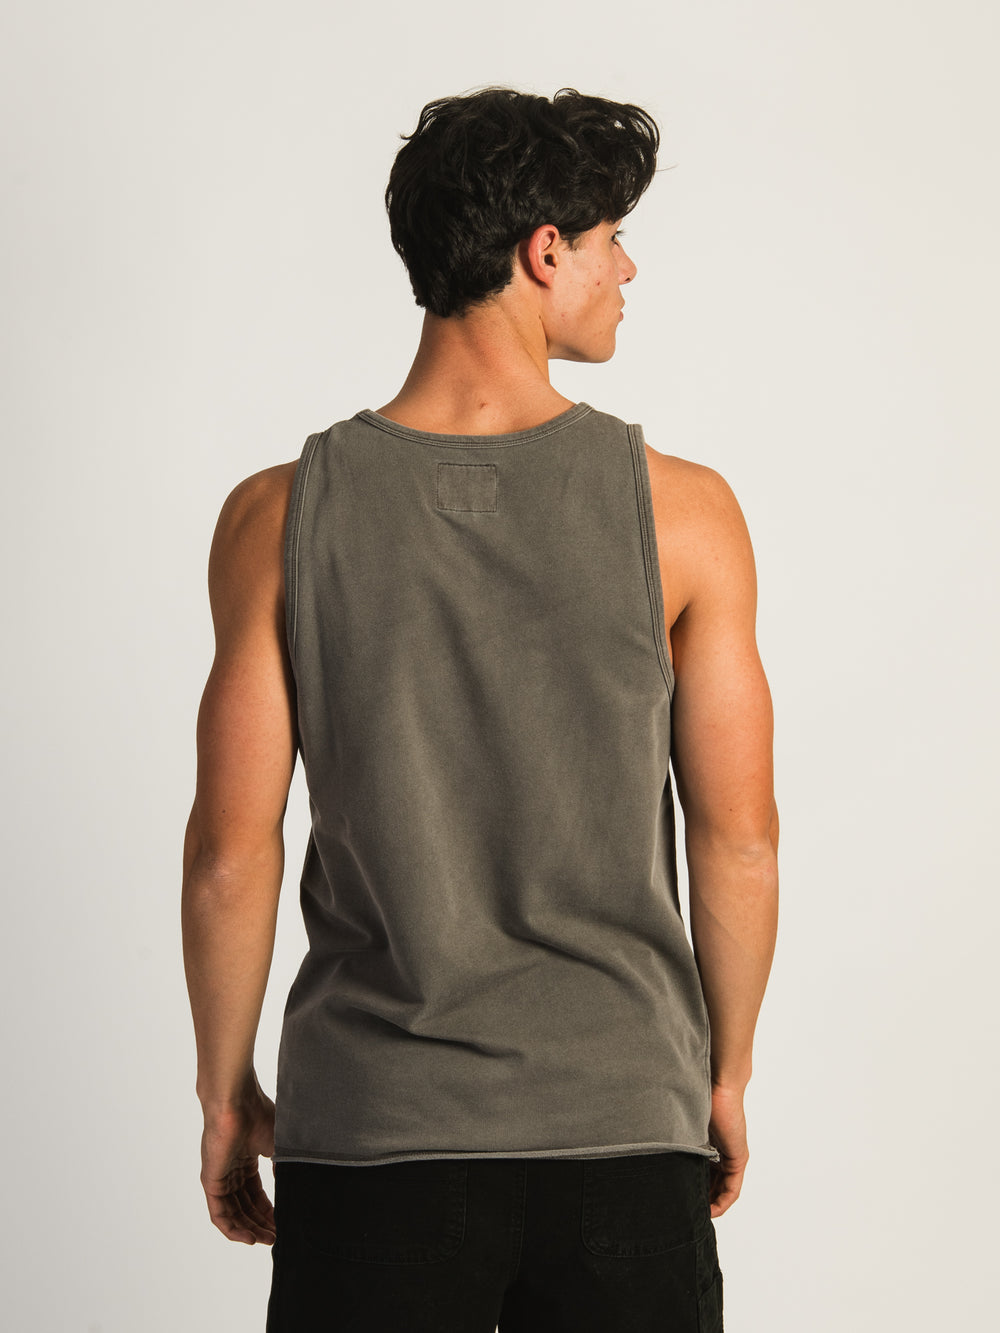 KOLBY RORY FRENCH TERRY TANK - IRON